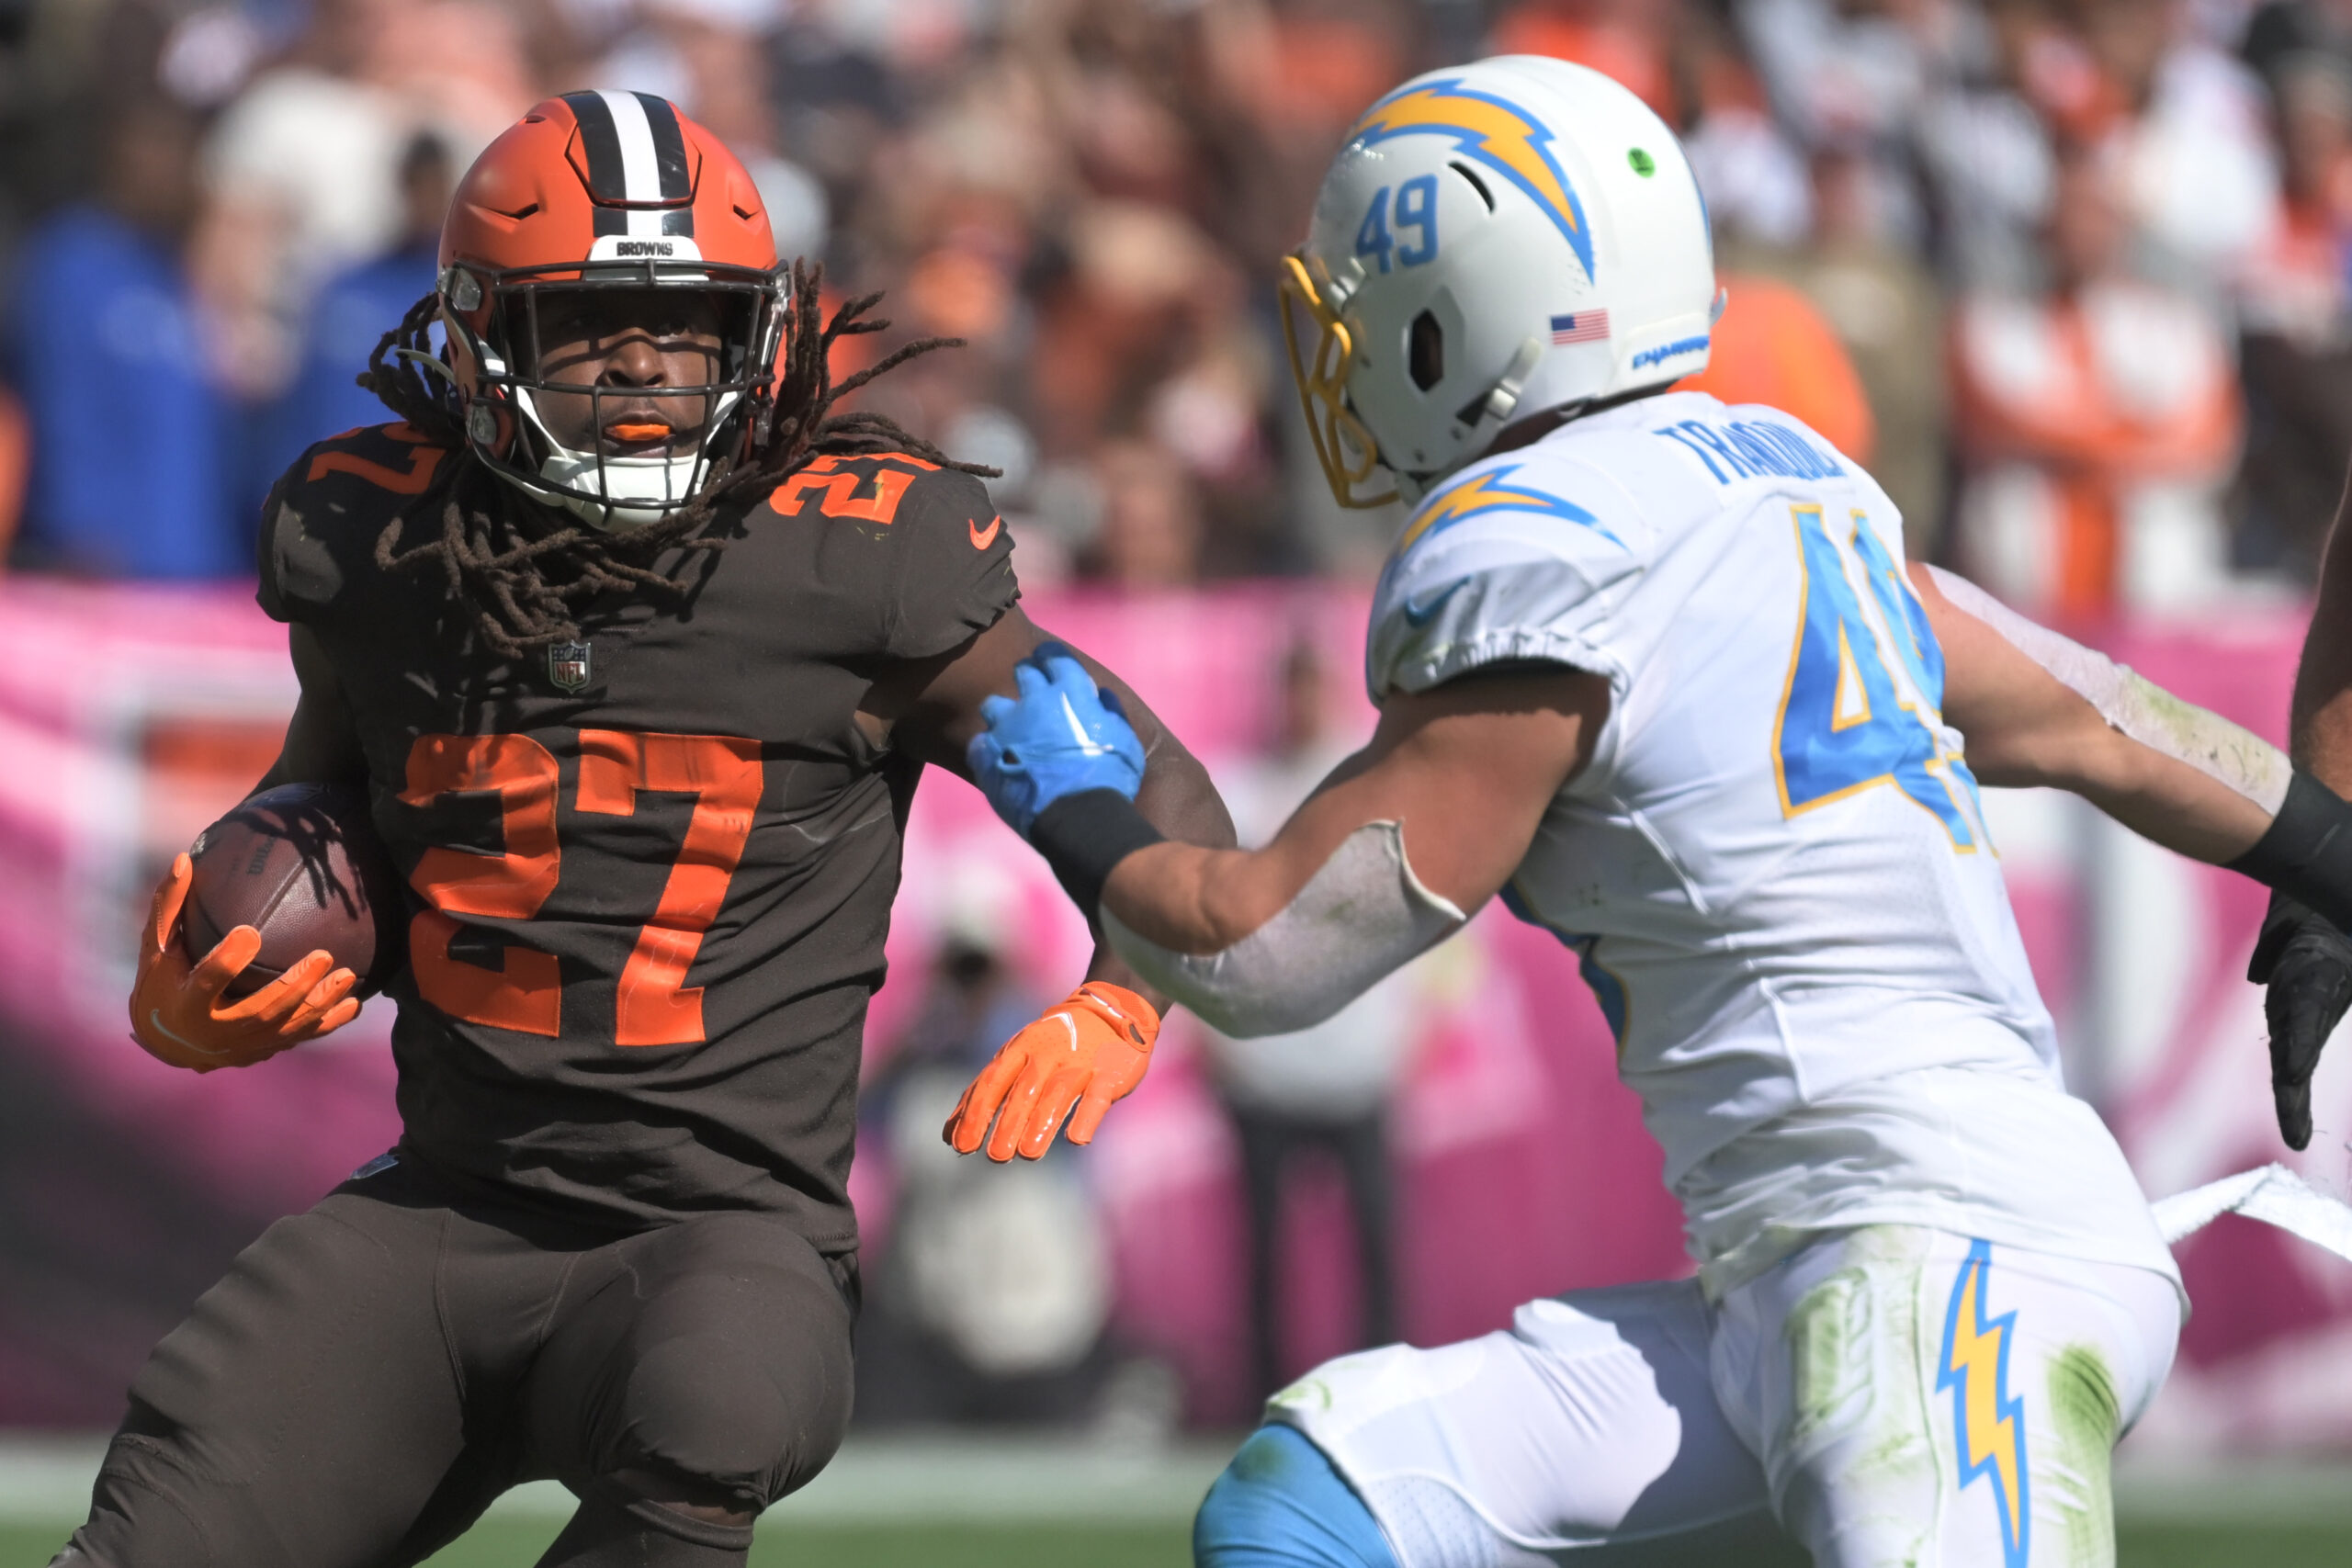 Top NFL DFS Lineup for Monday Night Football: For Browns vs. Bengals,  Should We Include Kareem Hunt, Nick Chubb, and Joe Mixon?